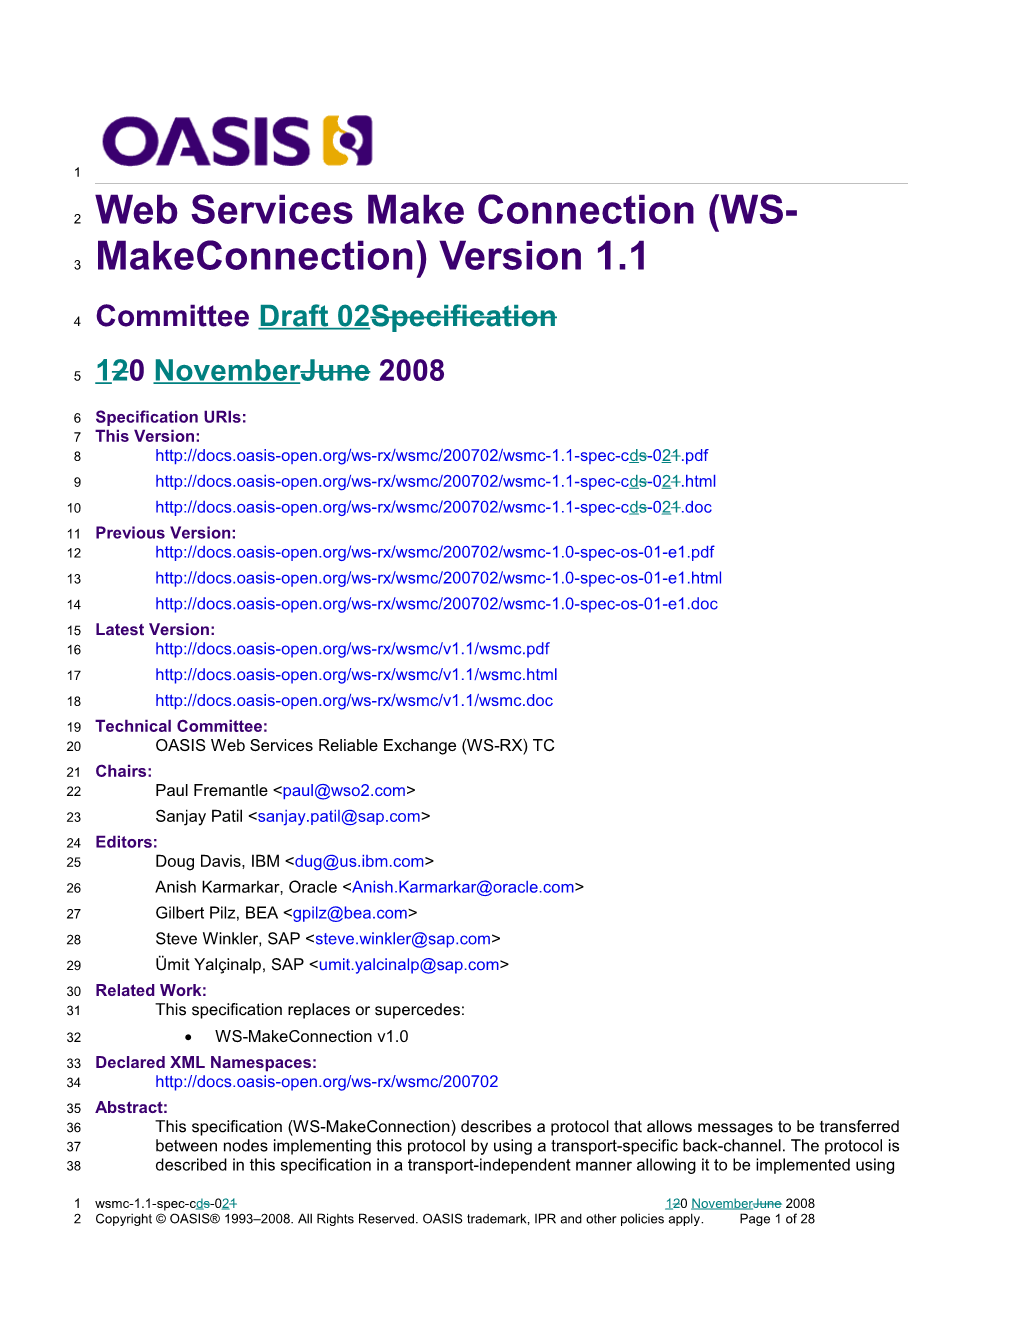 Web Services Make Connection (WS-Makeconnection) Version 1.1